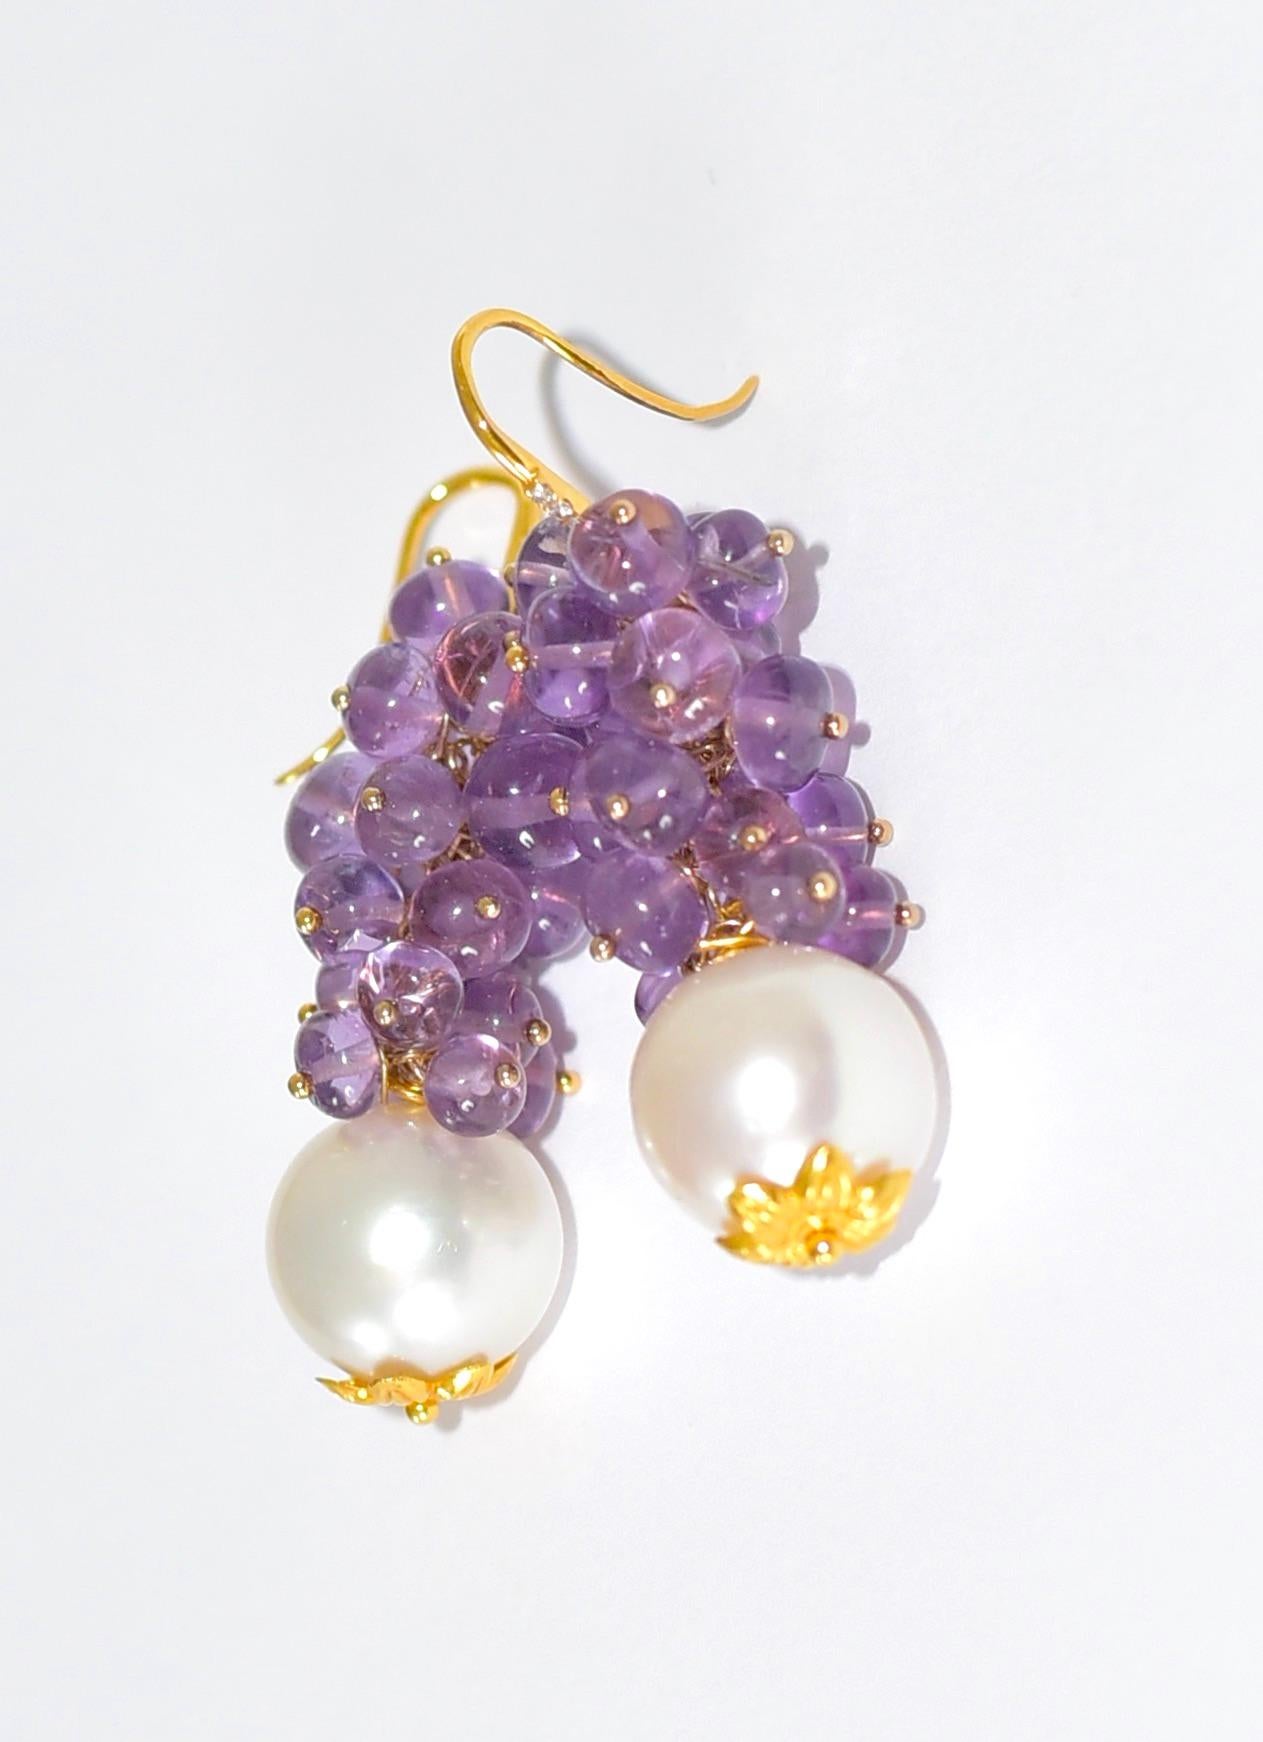 White South Sea Pearl, Rose De France Amethyst Earrings in 14K Solid Yellow Gold In New Condition For Sale In Astoria, NY